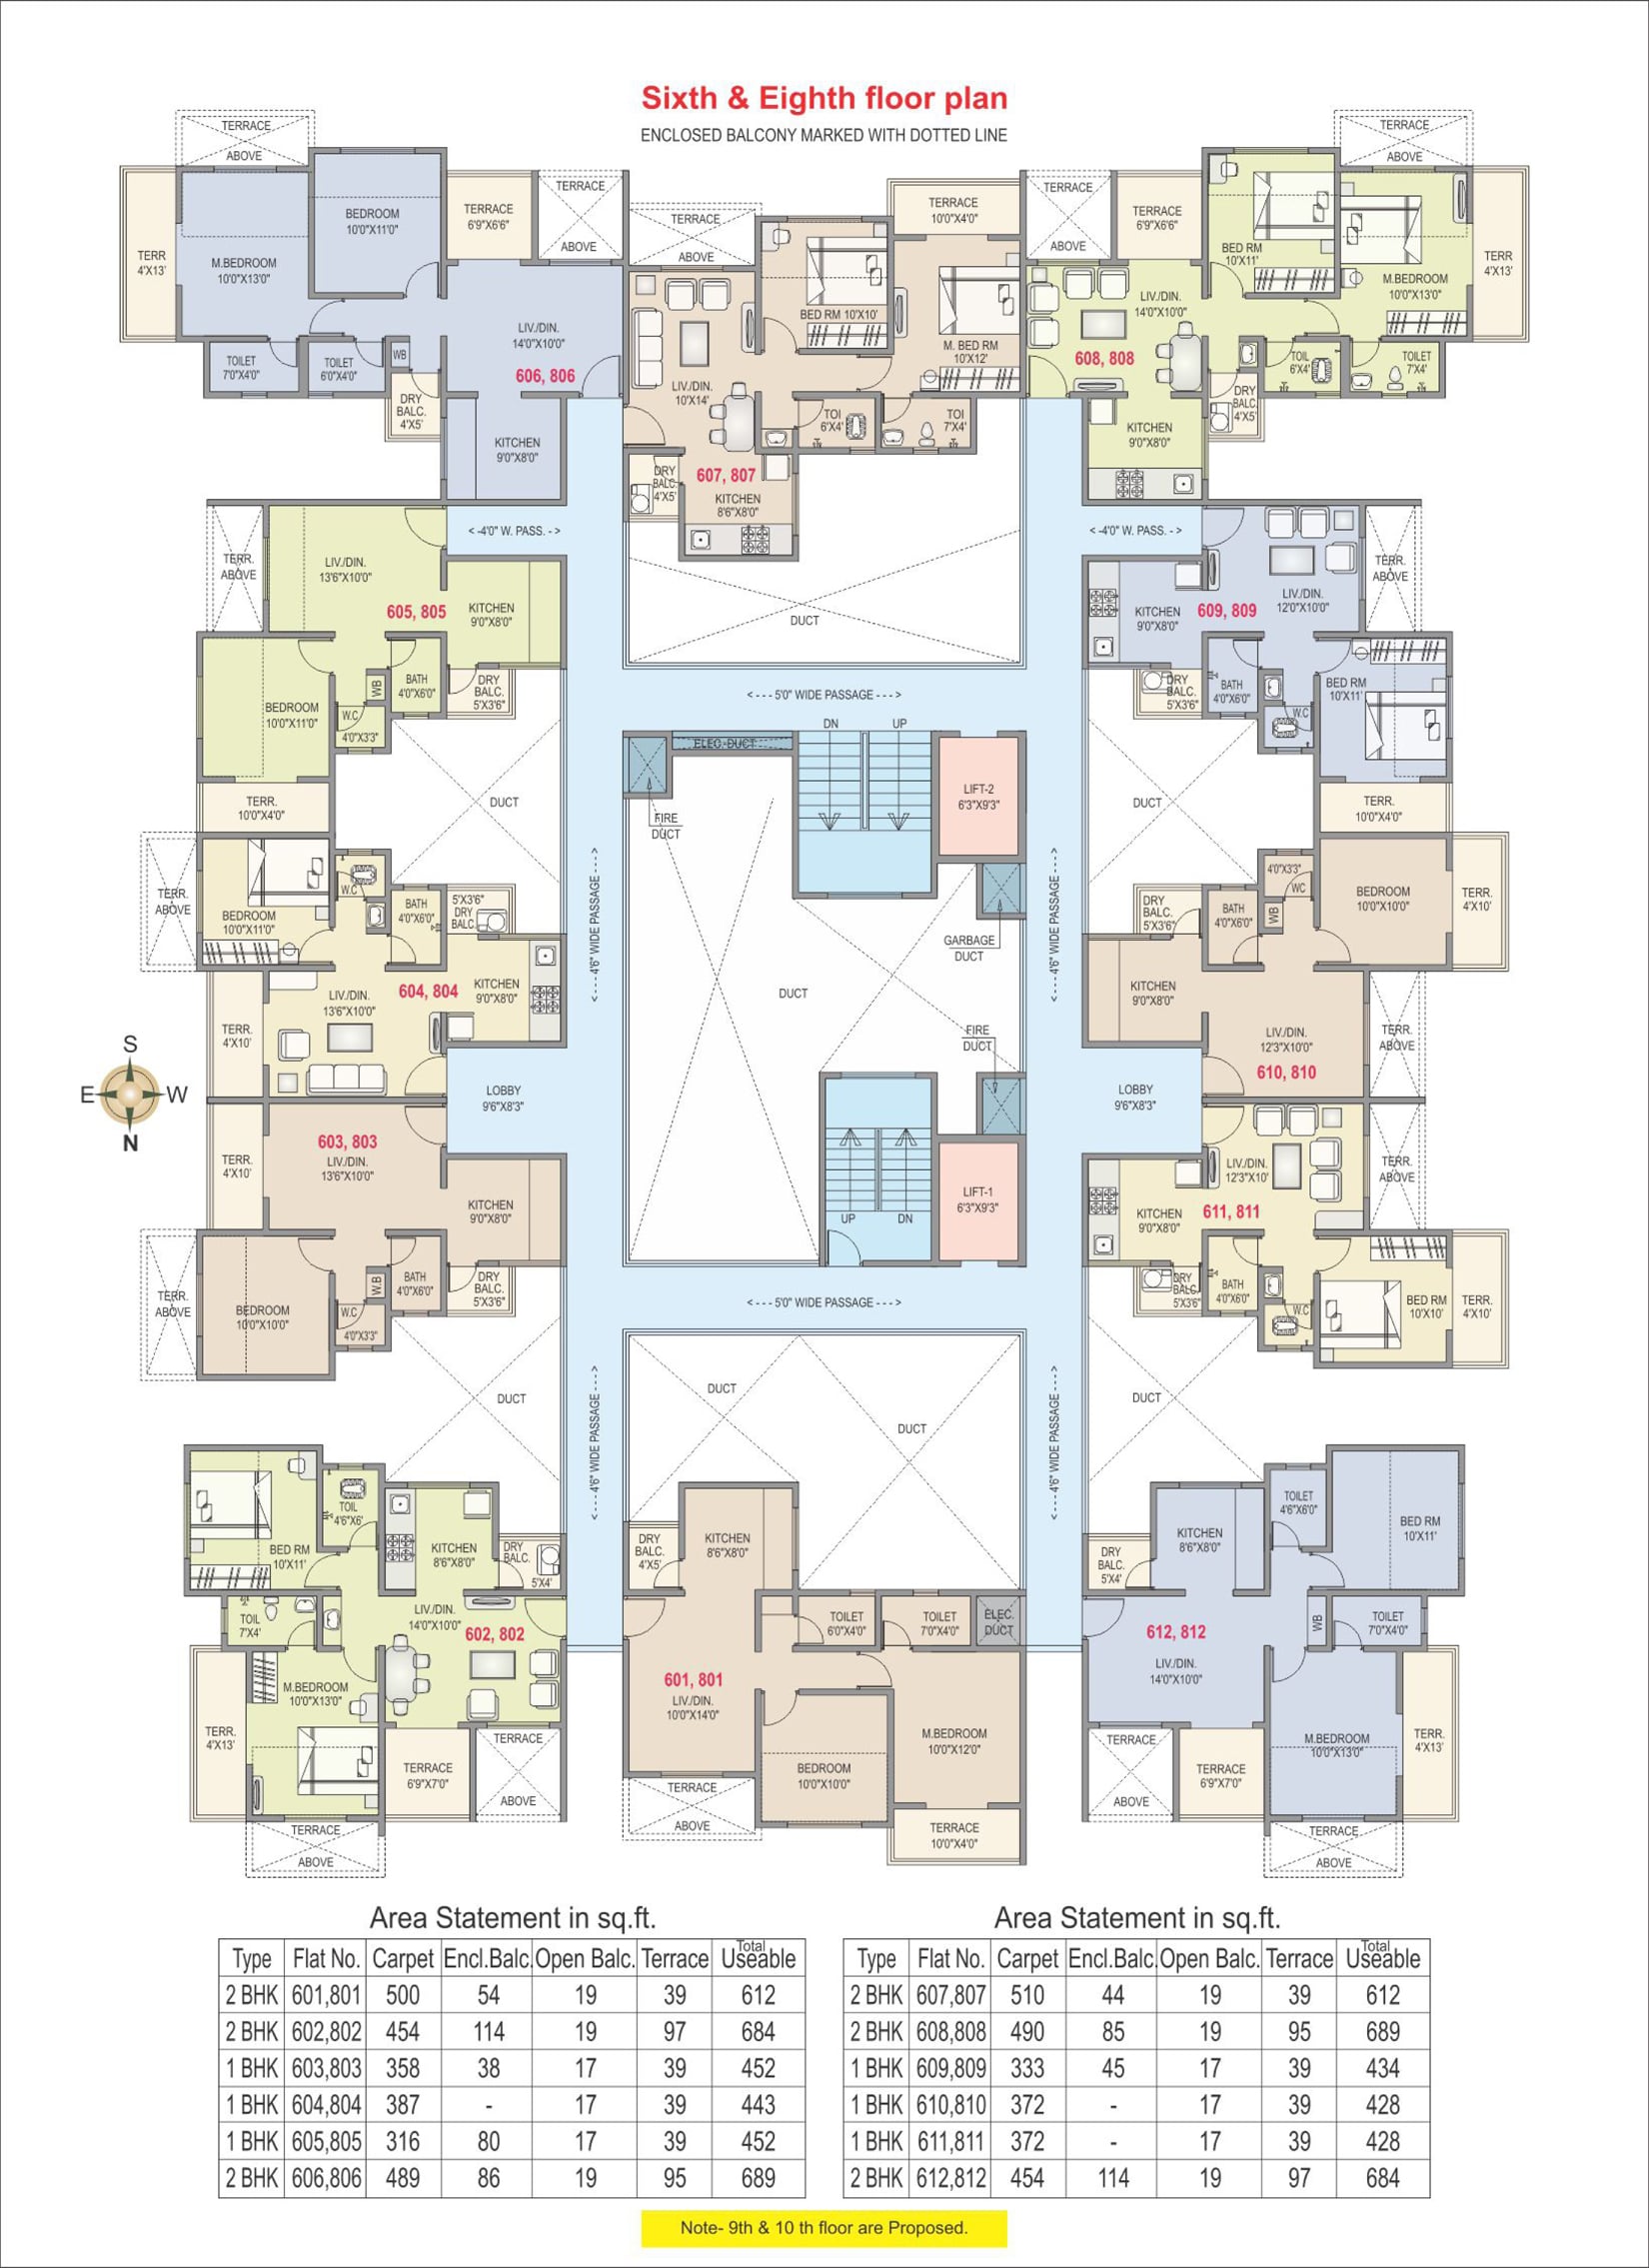 RKL Anand - Sixth and Eighth Floor Plan